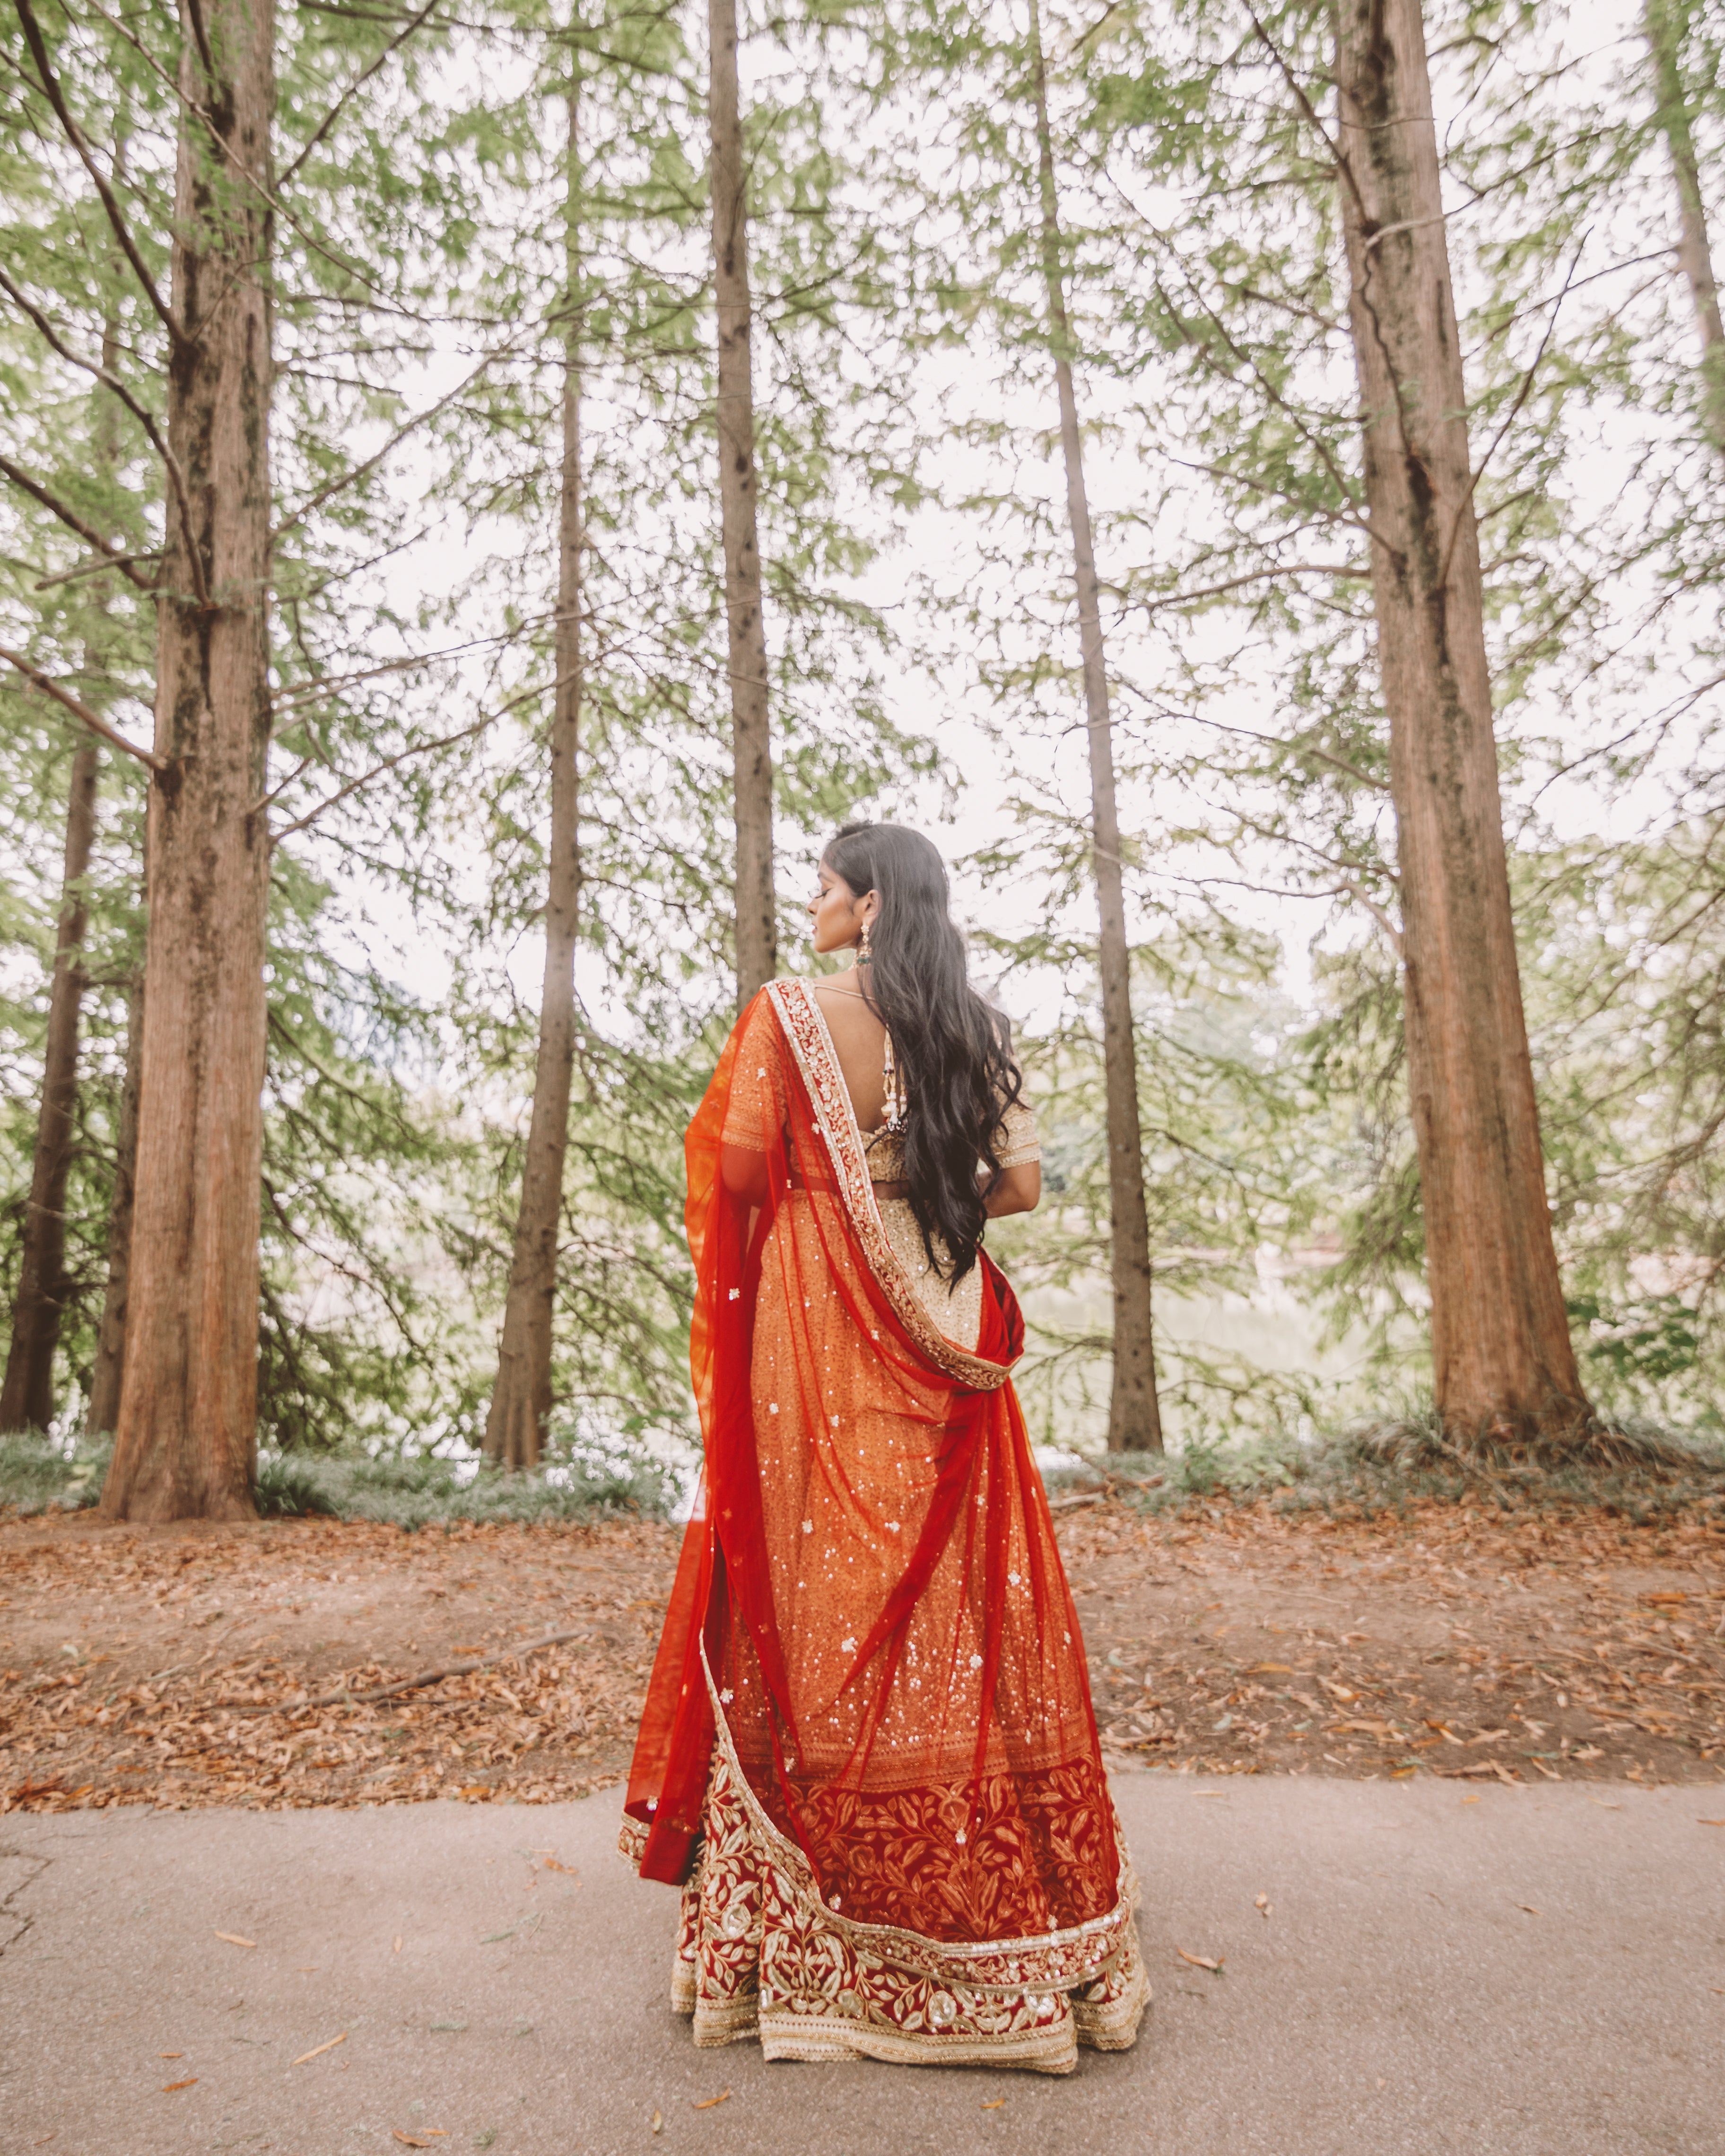 Shop Latest  Indian Wedding Collection for Bride and Groom in USA - Sushma Patel 